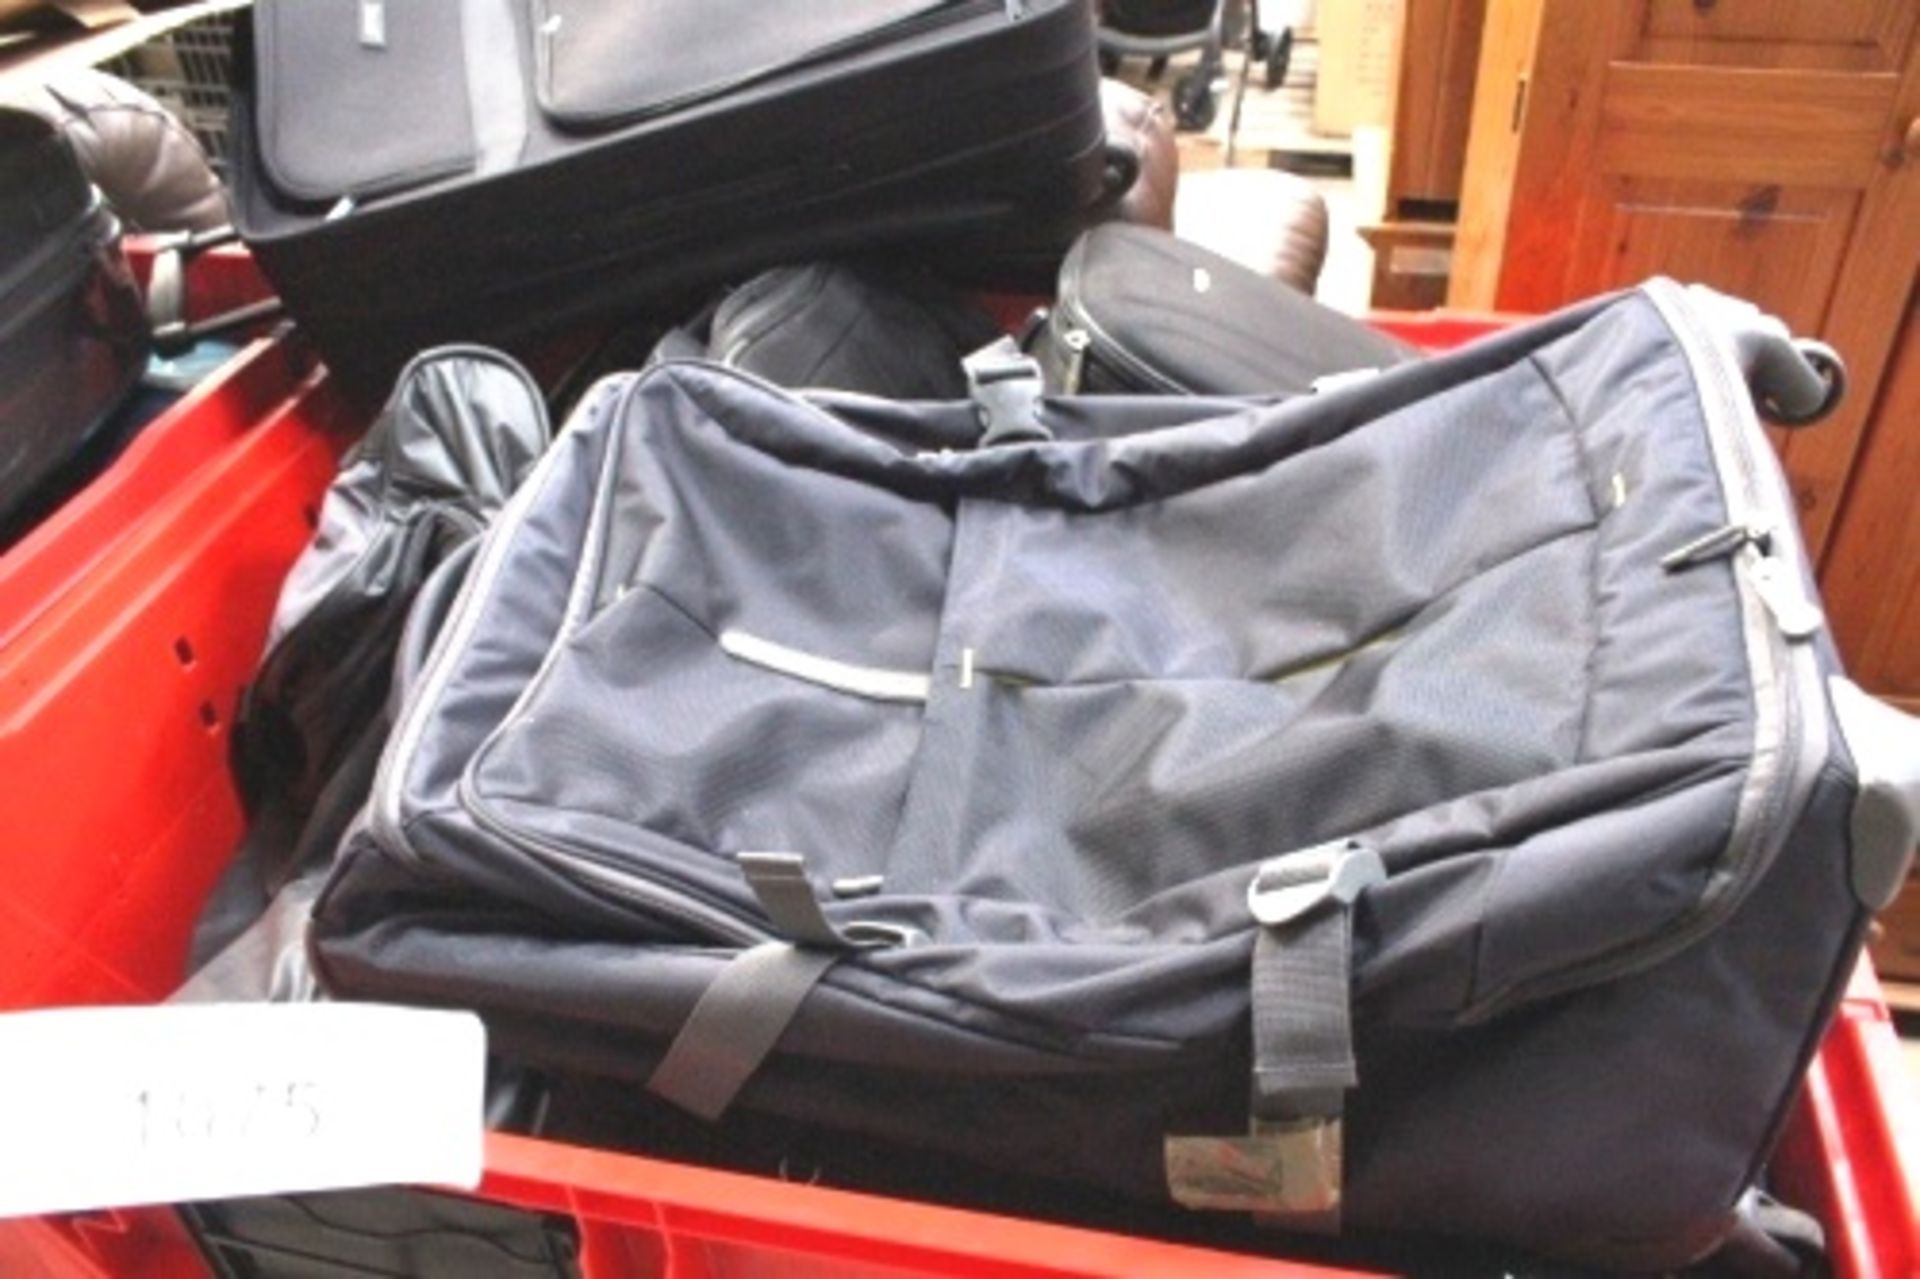 A quantity of suitcases and bags including Tripp, Samsonite etc. - Second-hand (GSF56)